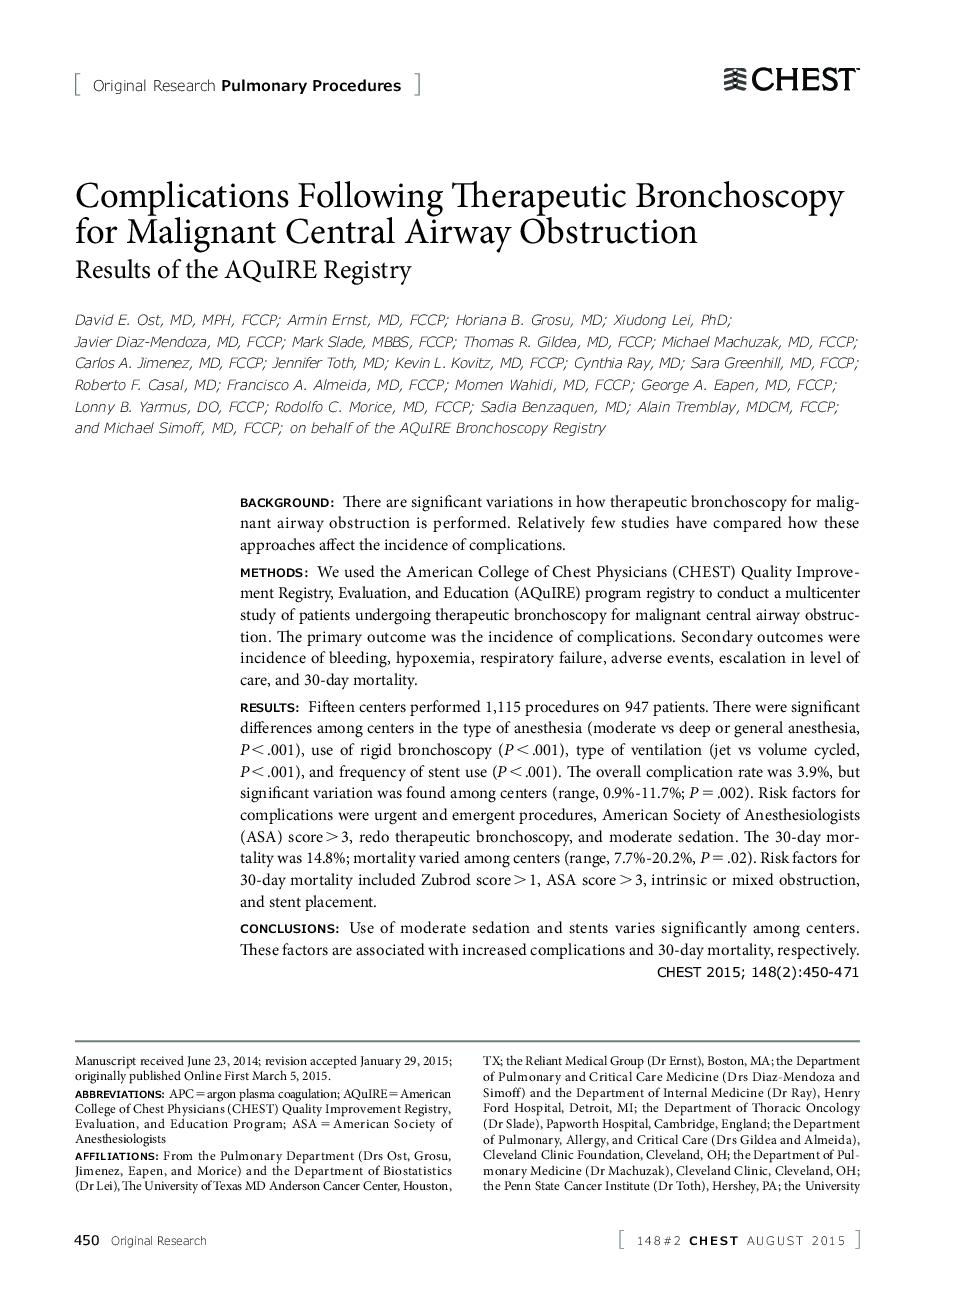 Complications Following Therapeutic Bronchoscopy for Malignant Central Airway Obstruction